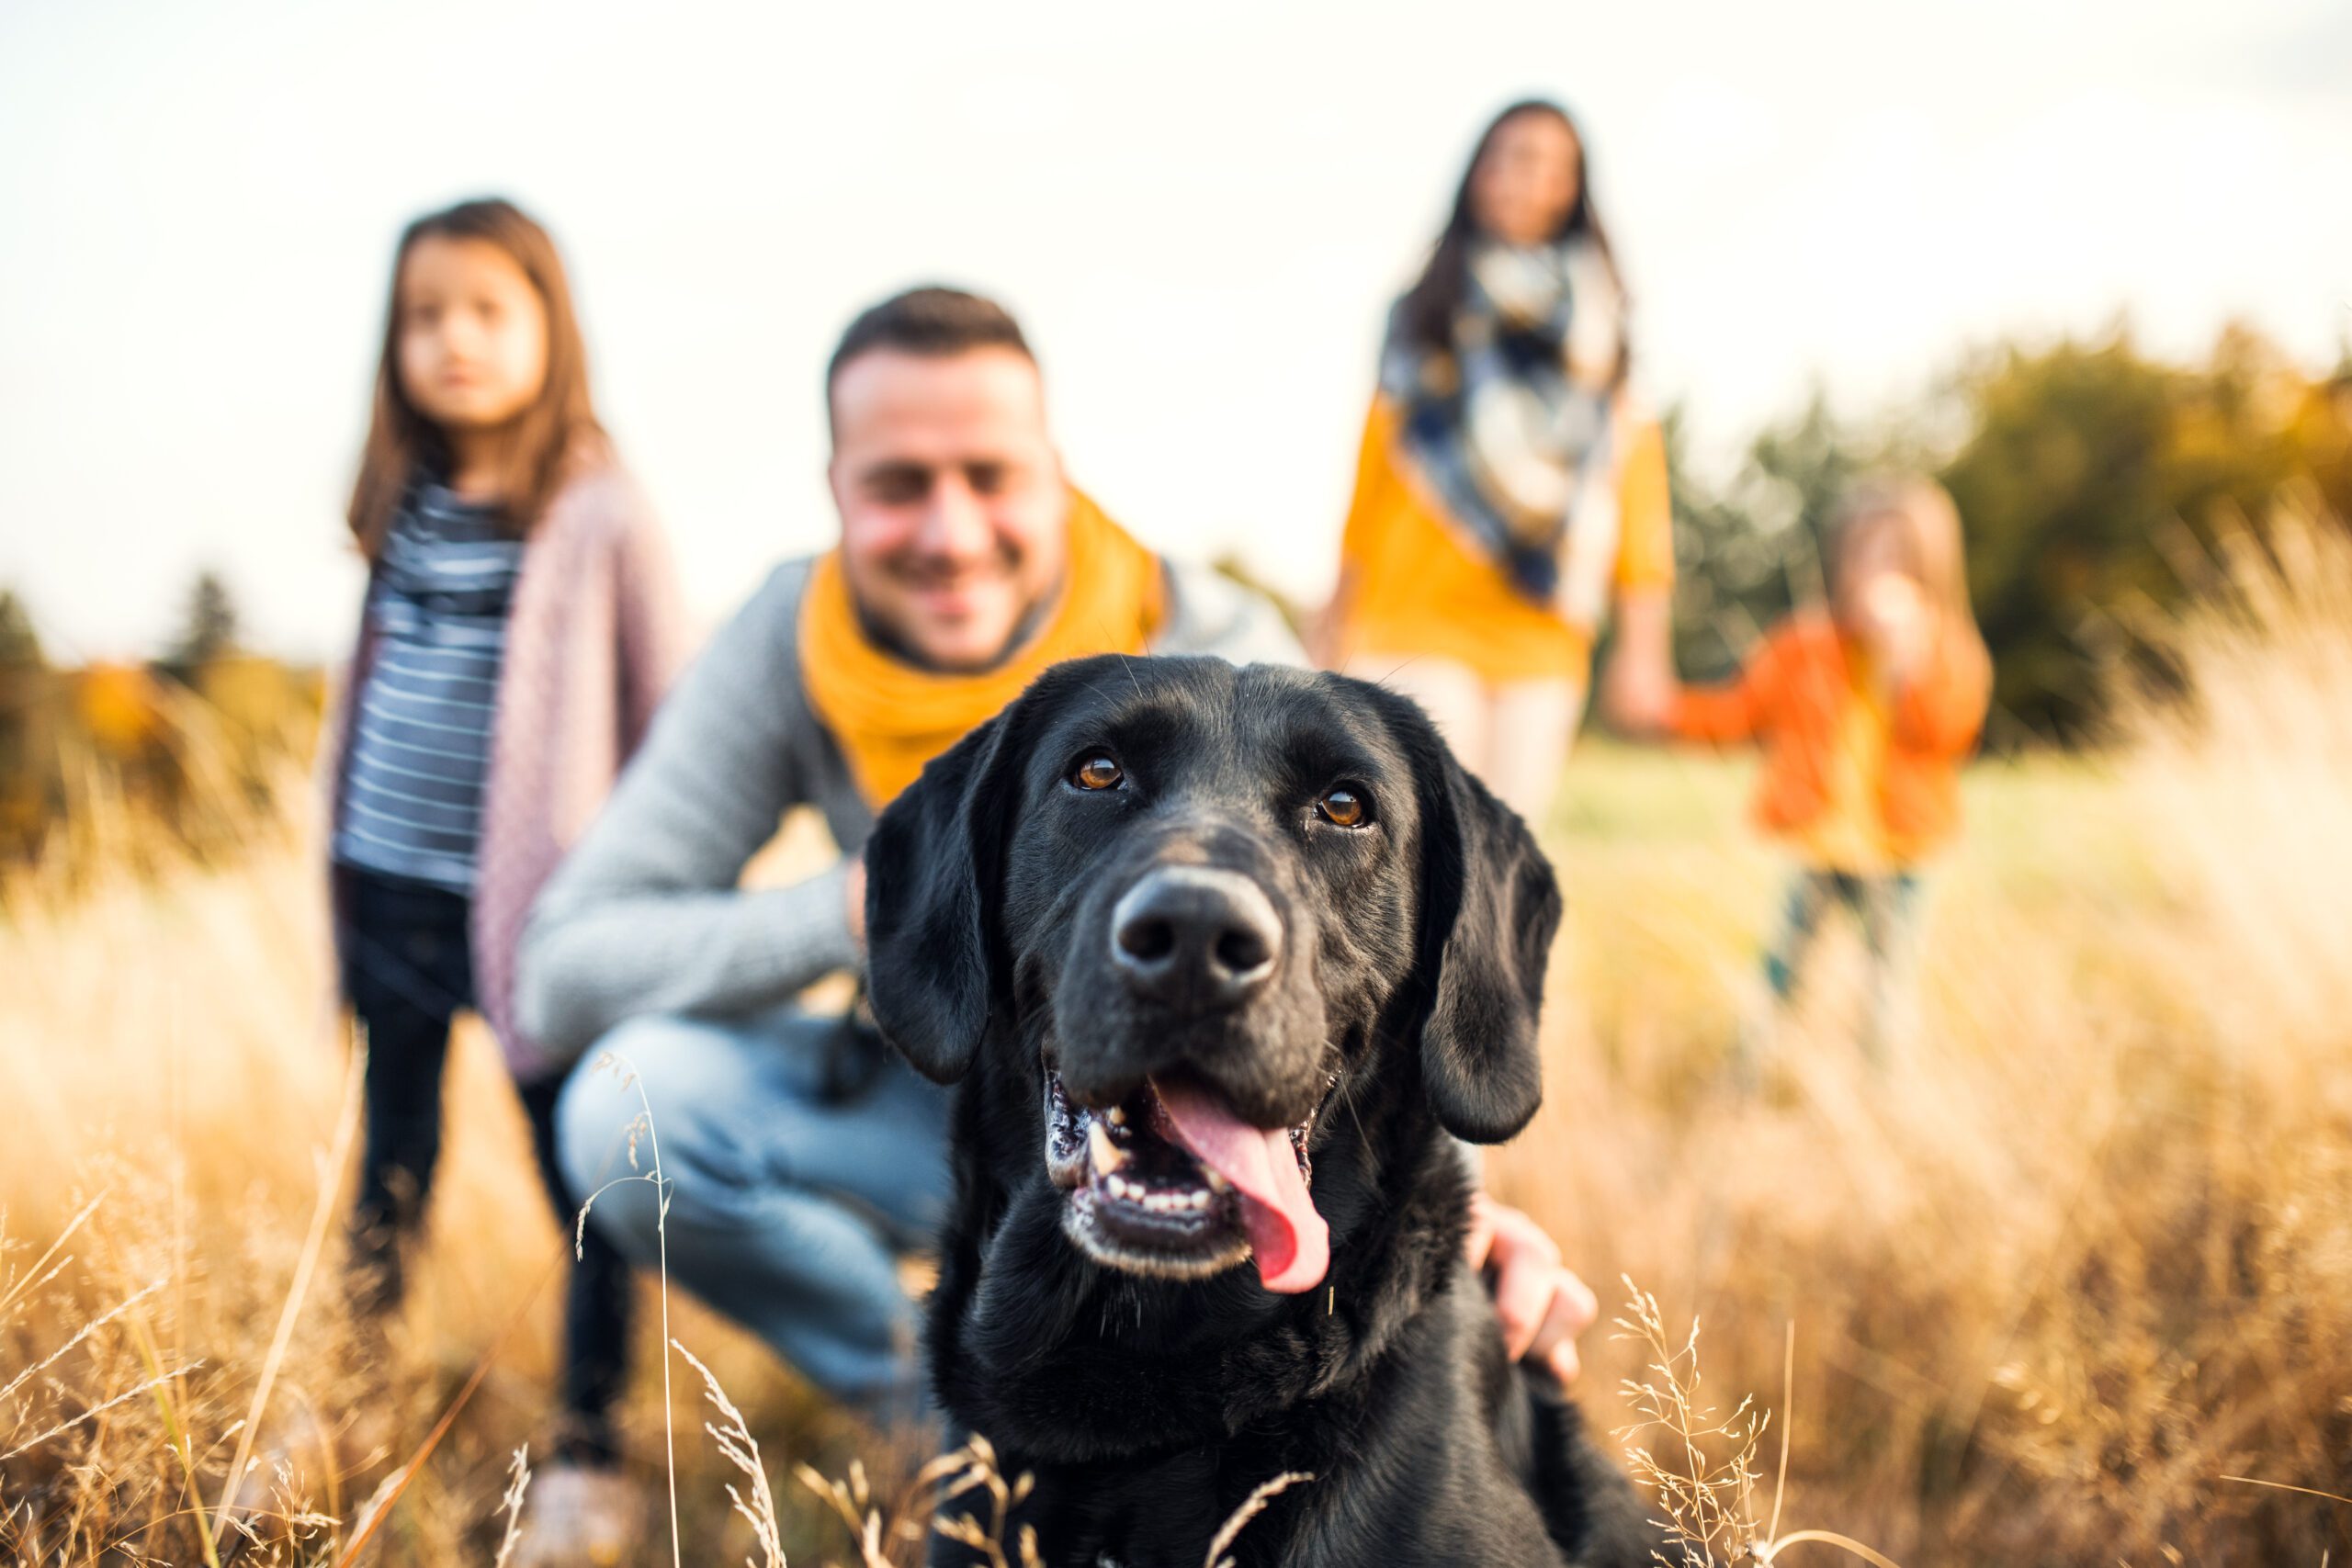 In this blog we'll explore some of the best pets and breeds that are known for their gentle nature and compatibility with young children